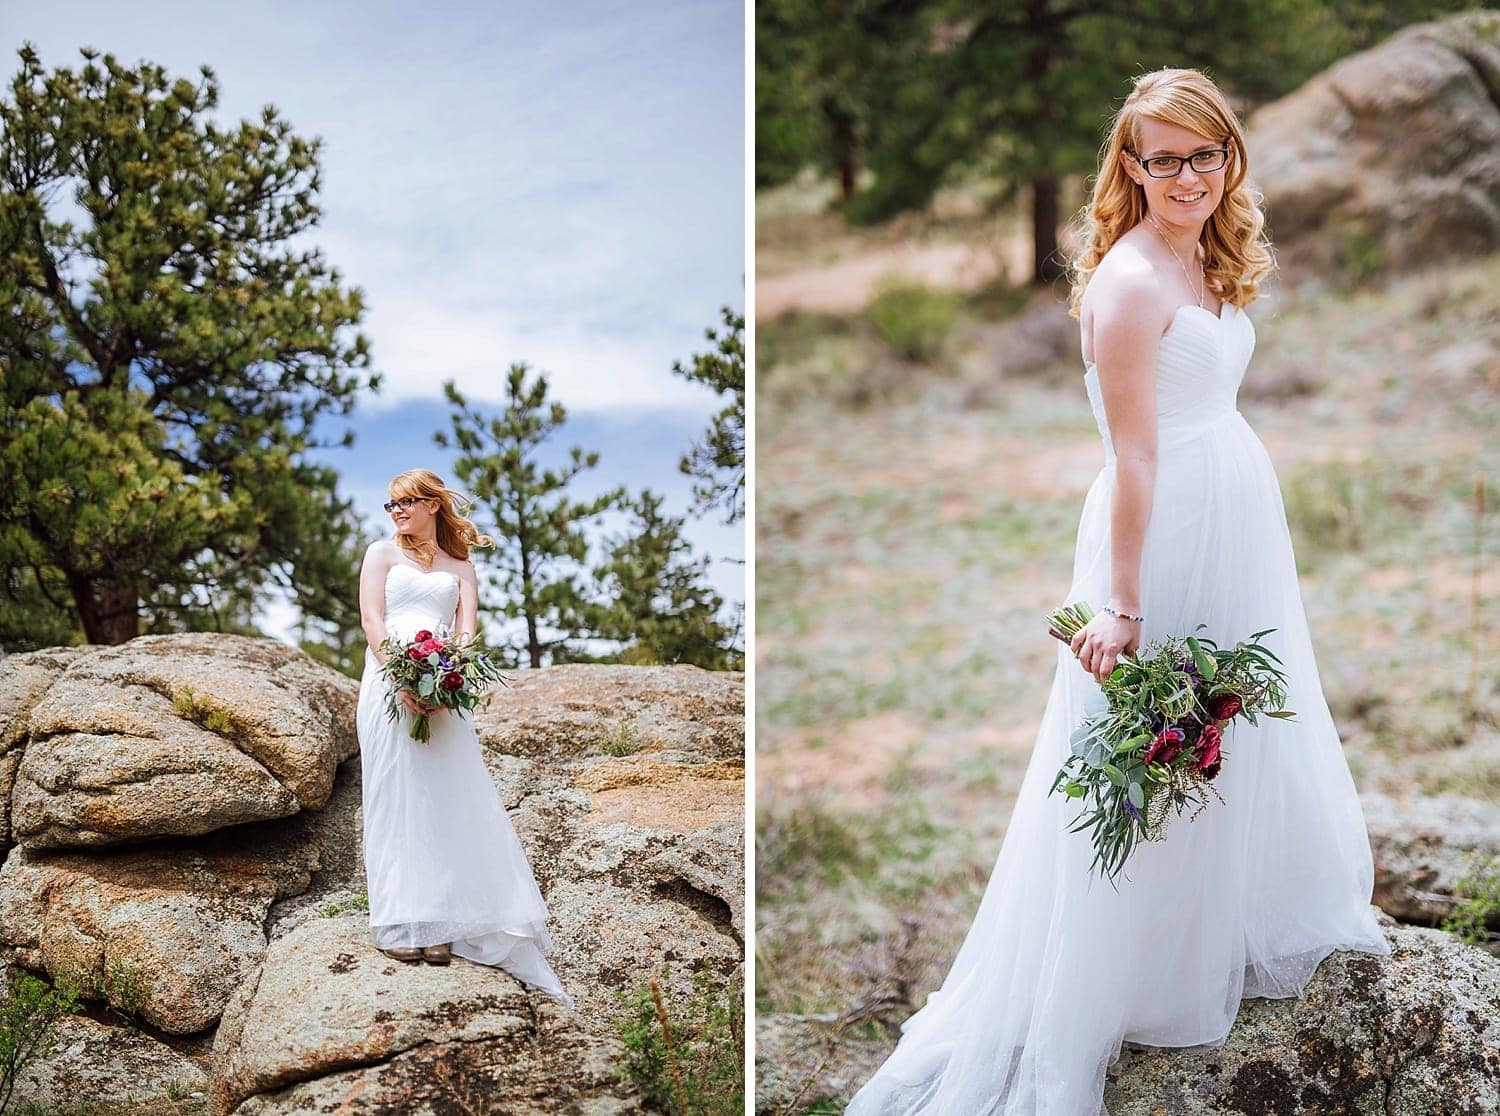 Bride is standing on rocks, is wearing a white wedding dress, and holding a bouquet with red flowers. 